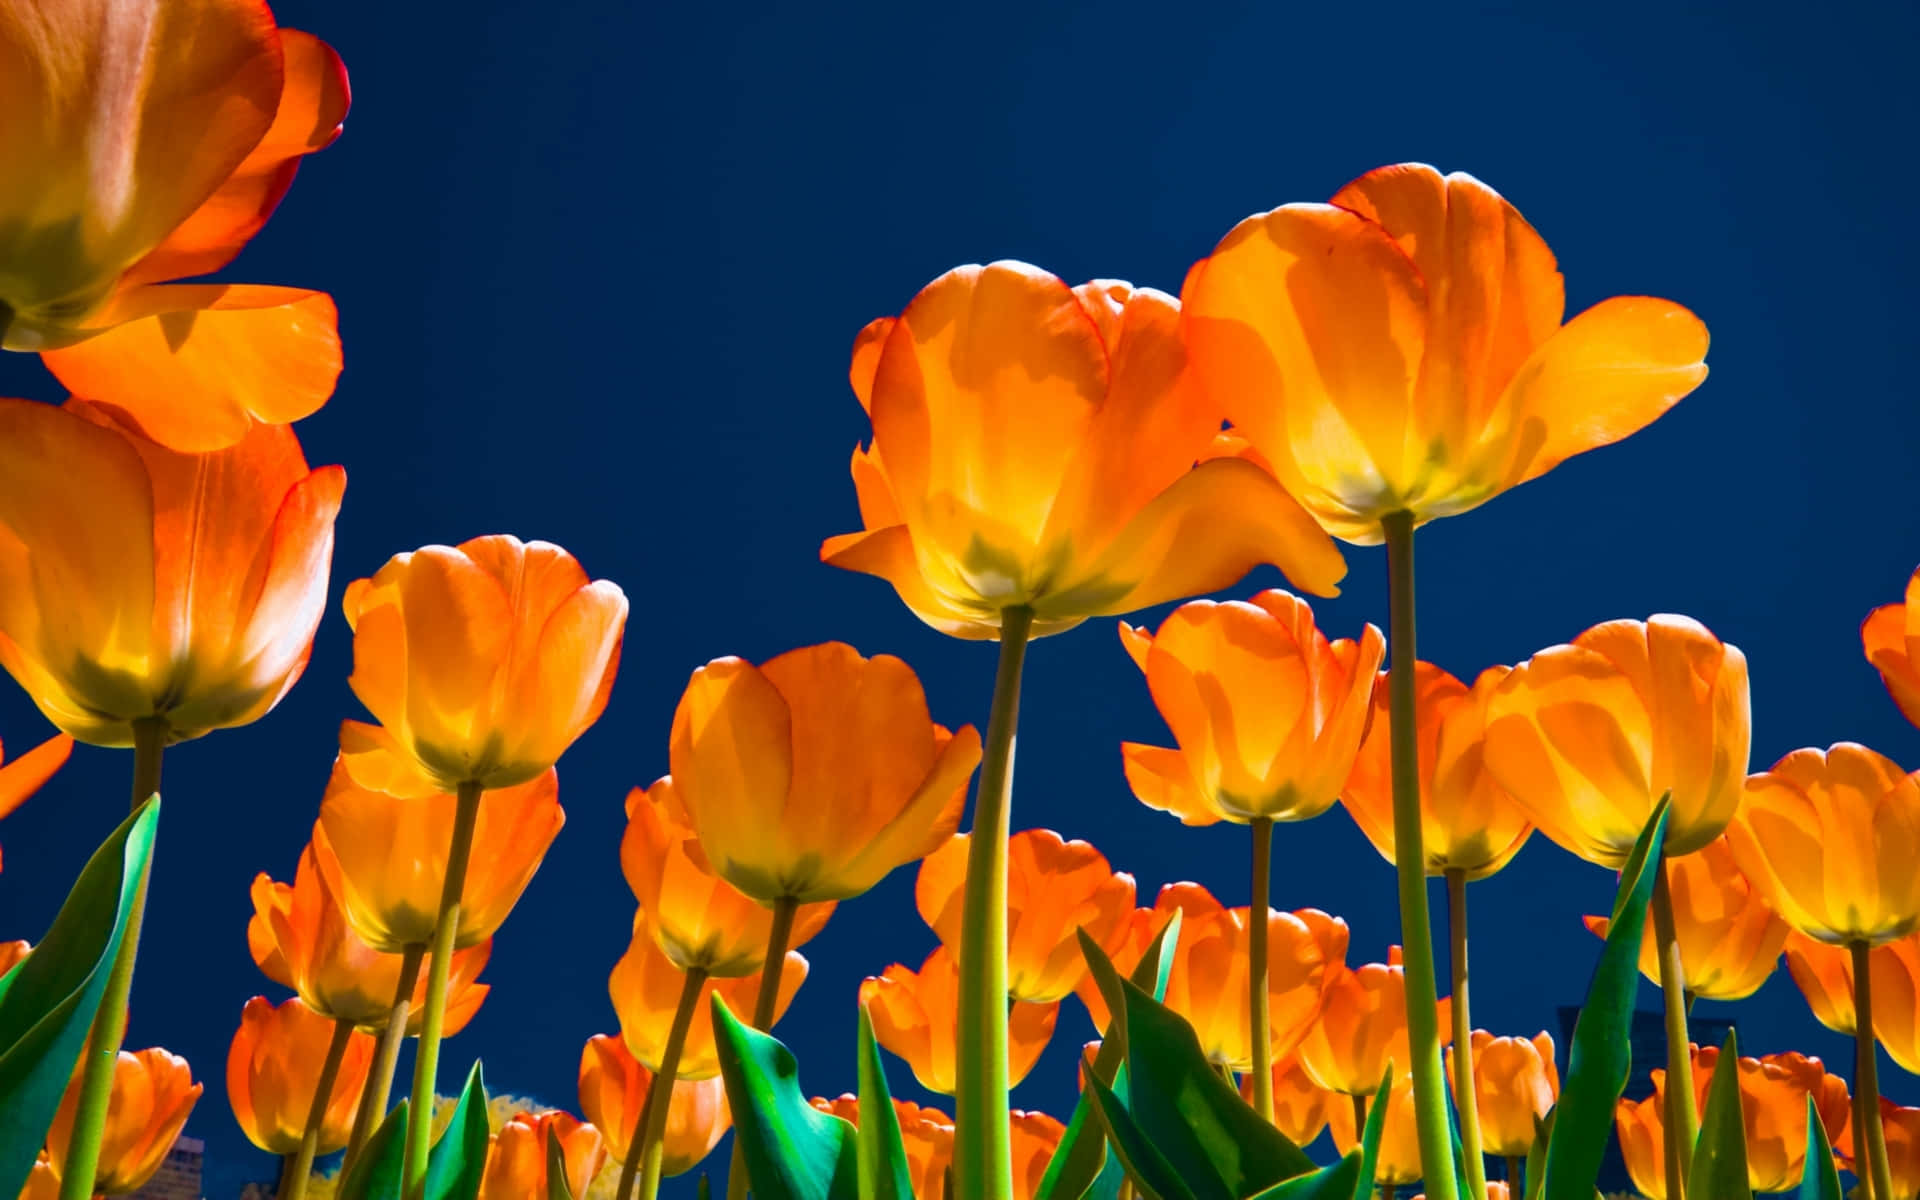 Caption: Blooming Yellow Tulips in a Vibrant Field Wallpaper